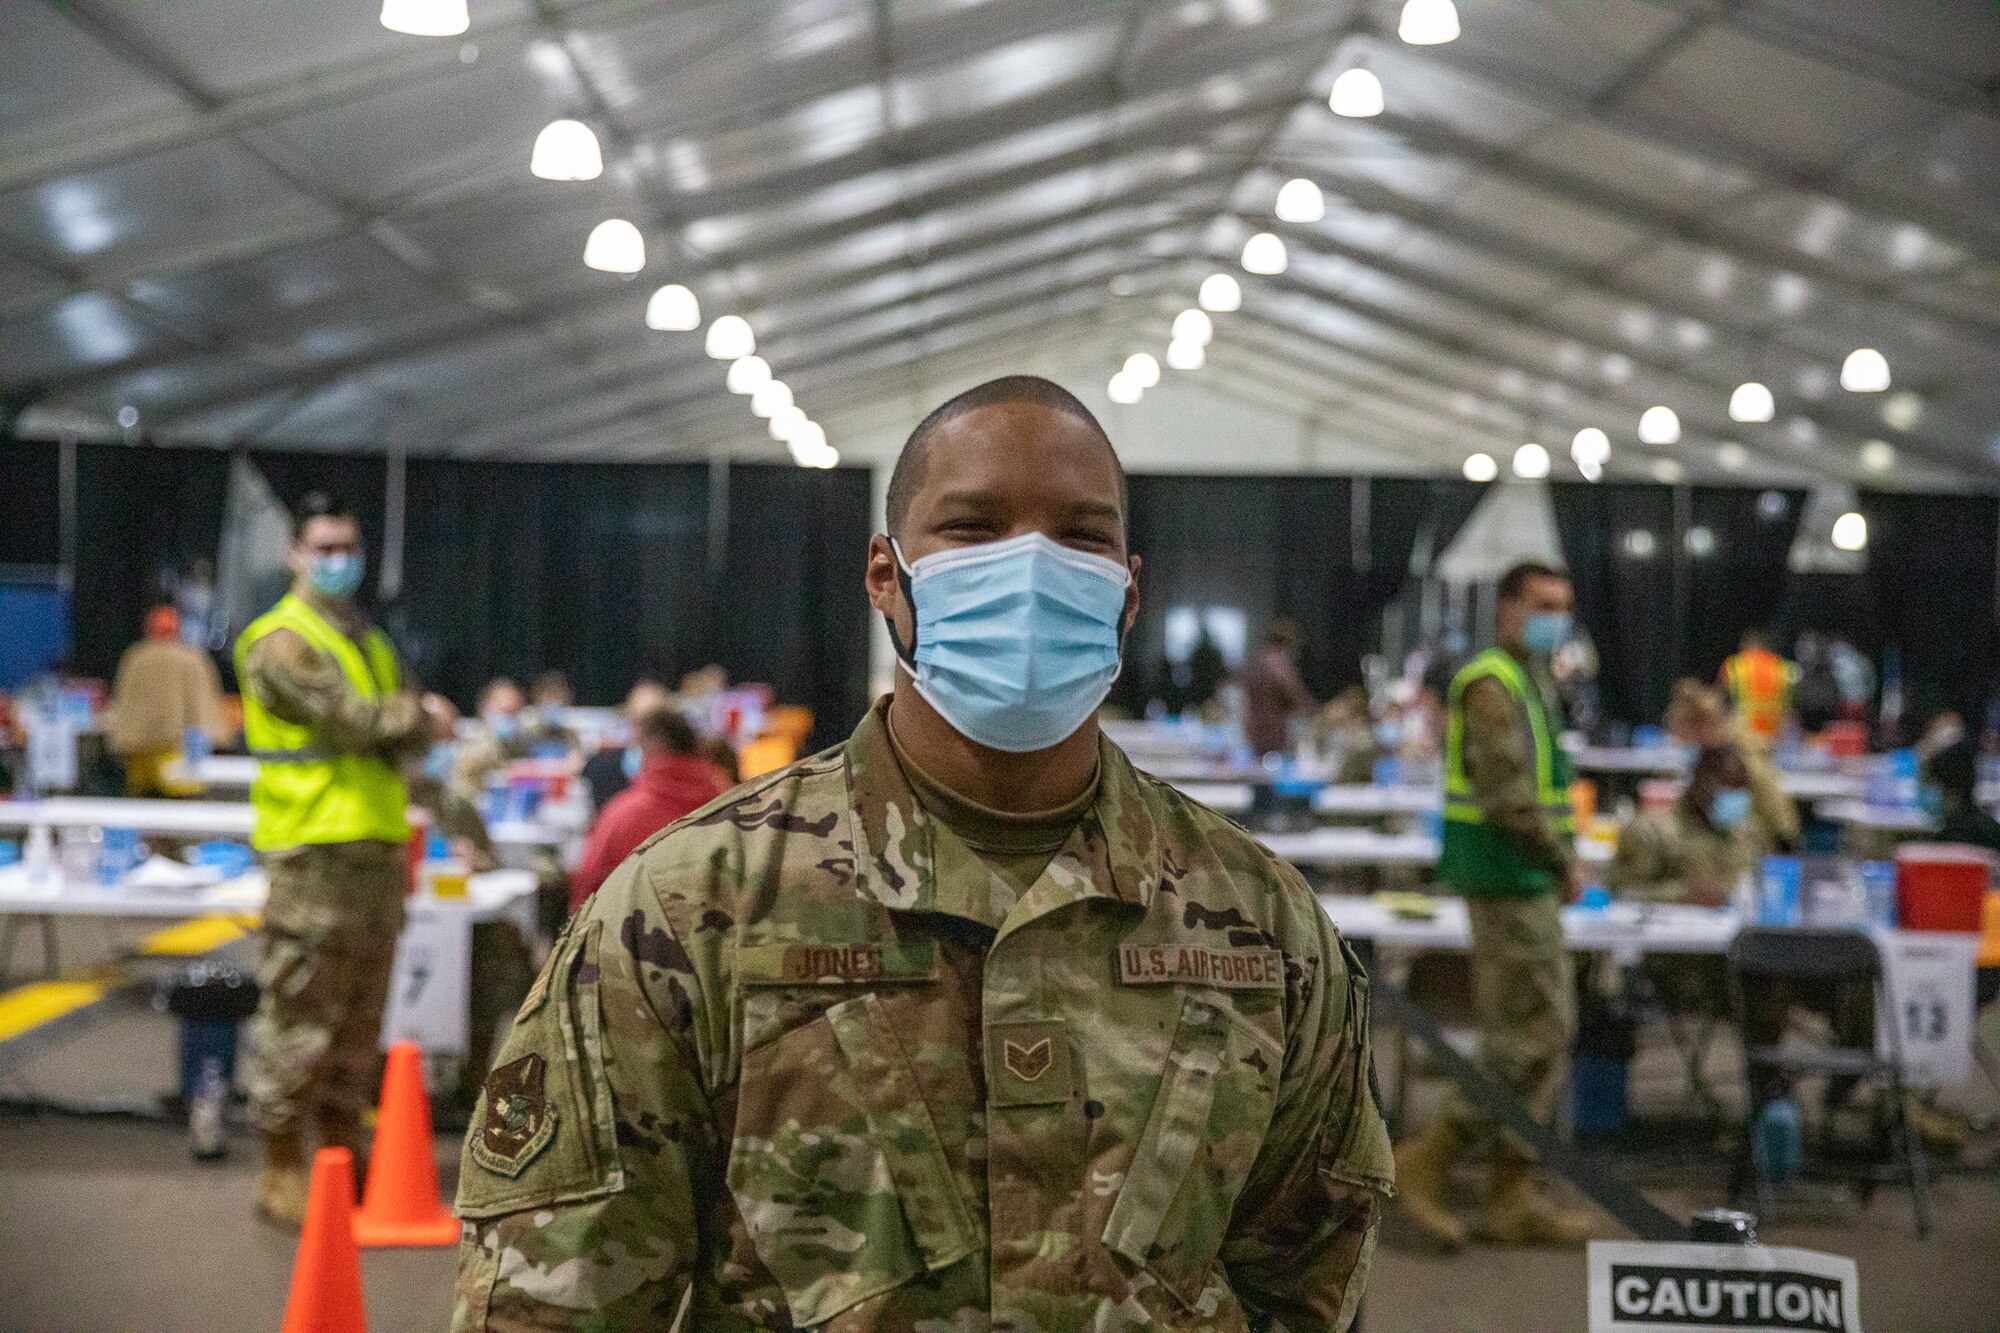 U.S. Air Force Staff Sgt. Deshaun Jones, an Airman assigned to the 6th Force Support Squadron based in Tampa, Florida, poses for a photo at the Community Vaccination Center (CVC) at the Minnesota State Fairgrounds in St. Paul, Minnesota, April 26, 2021. The CVC is completely operational and is welcoming the St. Paul community to receive free COVID-19 vaccines. U.S. Northern Command, through U.S. Army North, remains committed to providing continued, flexible Department of Defense support to the Federal Emergency Management Agency as part of the whole-of-government response to COVID-19. (U.S. Army photo by Spc. Hunter Garcia)